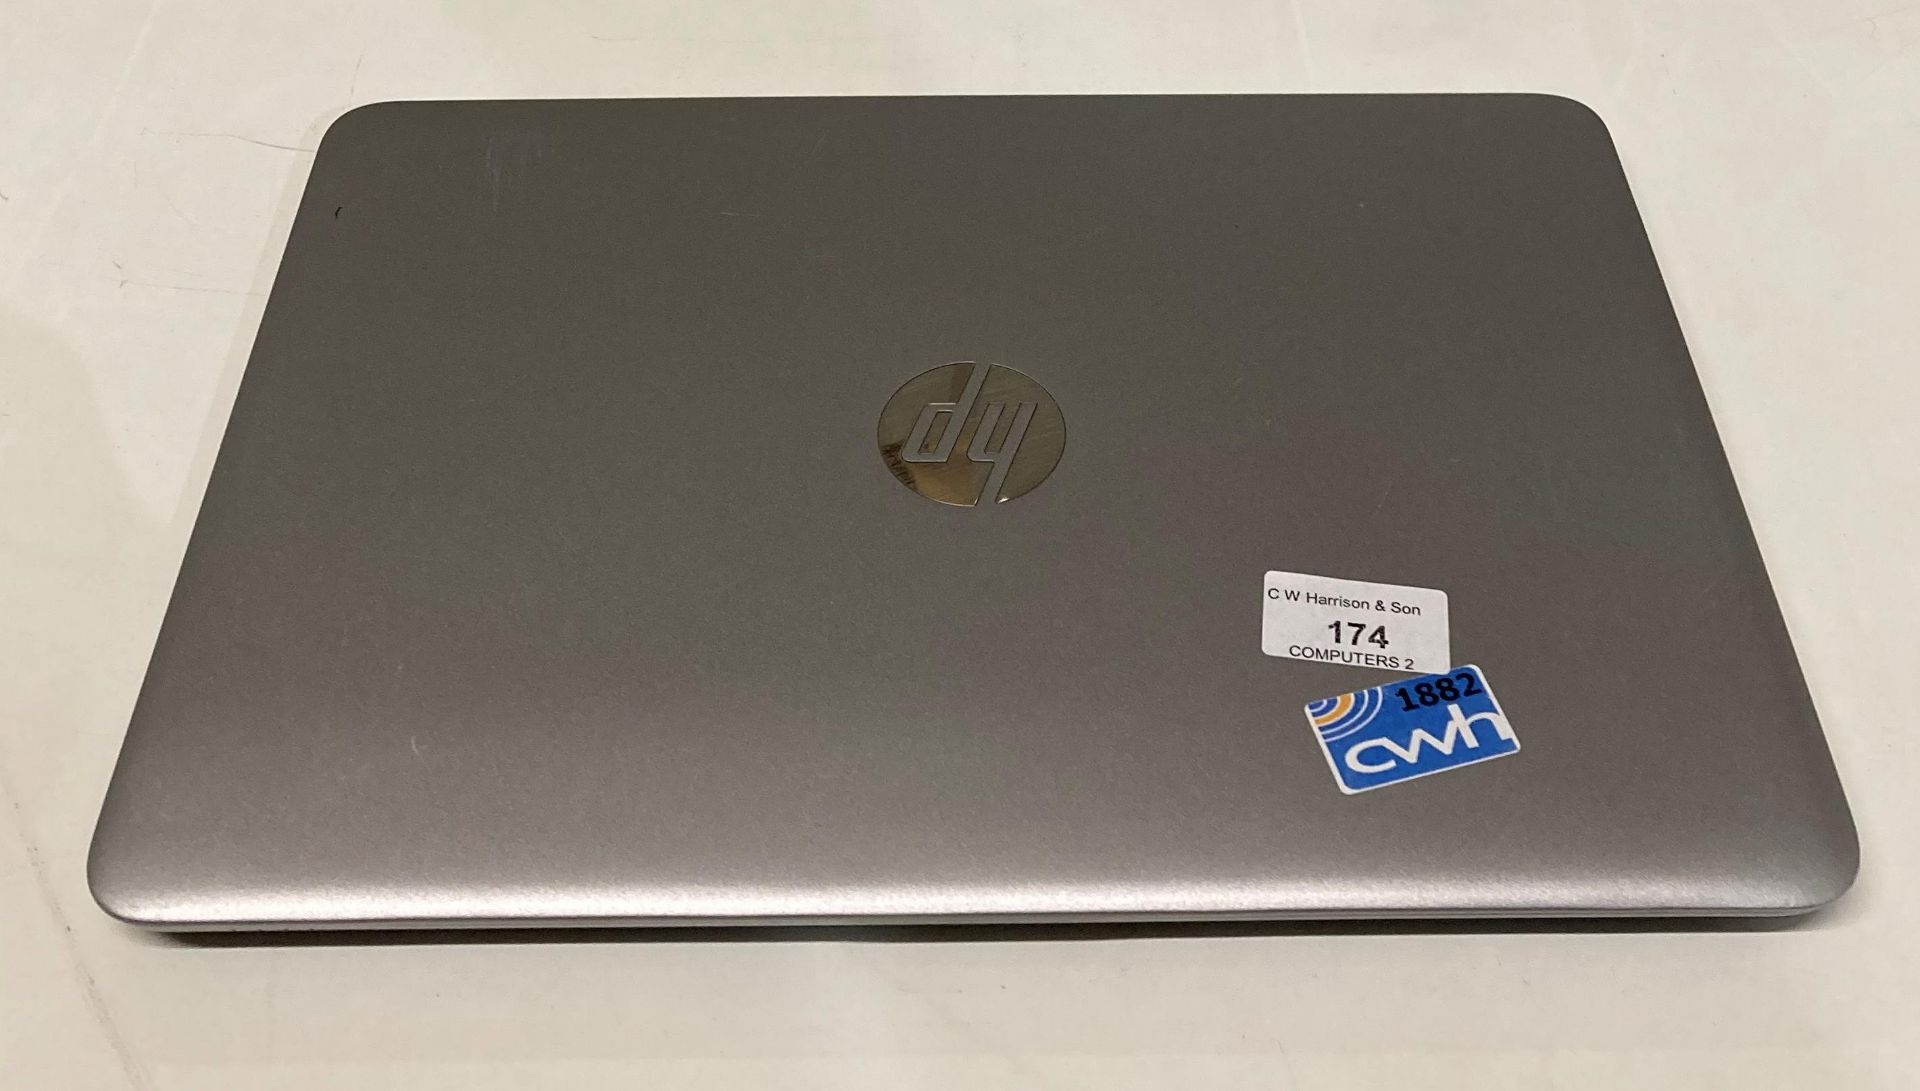 HP PrBook 840 G3 Core i5 laptop 8GB RAM, 500GB Hard Drive (no charger or power lead, - Image 2 of 2